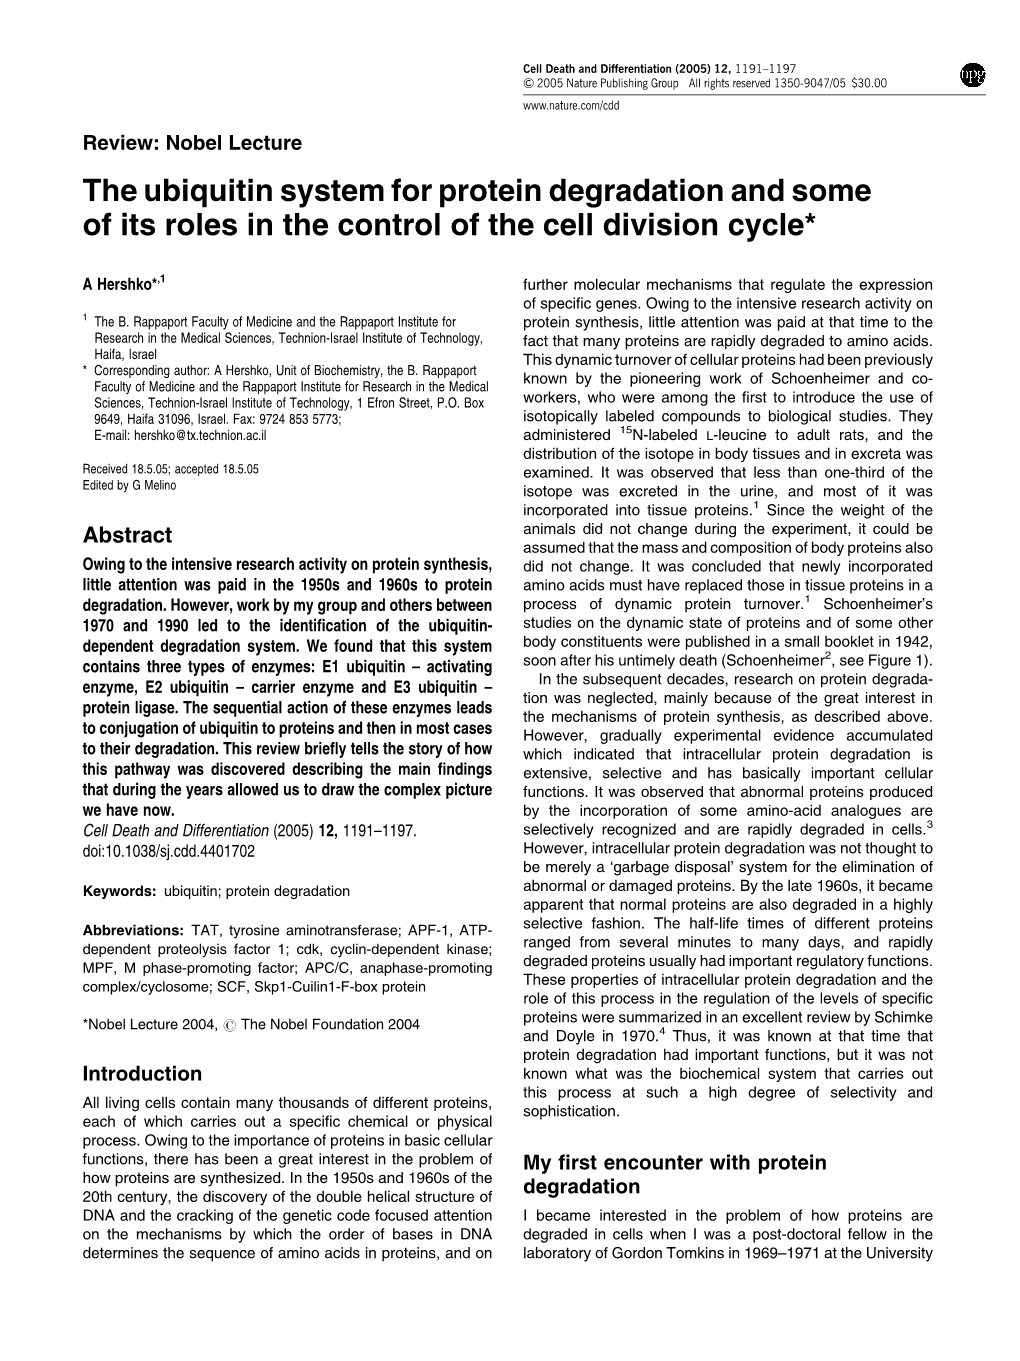 The Ubiquitin System for Protein Degradation and Some of Its Roles in the Control of the Cell Division Cycle*